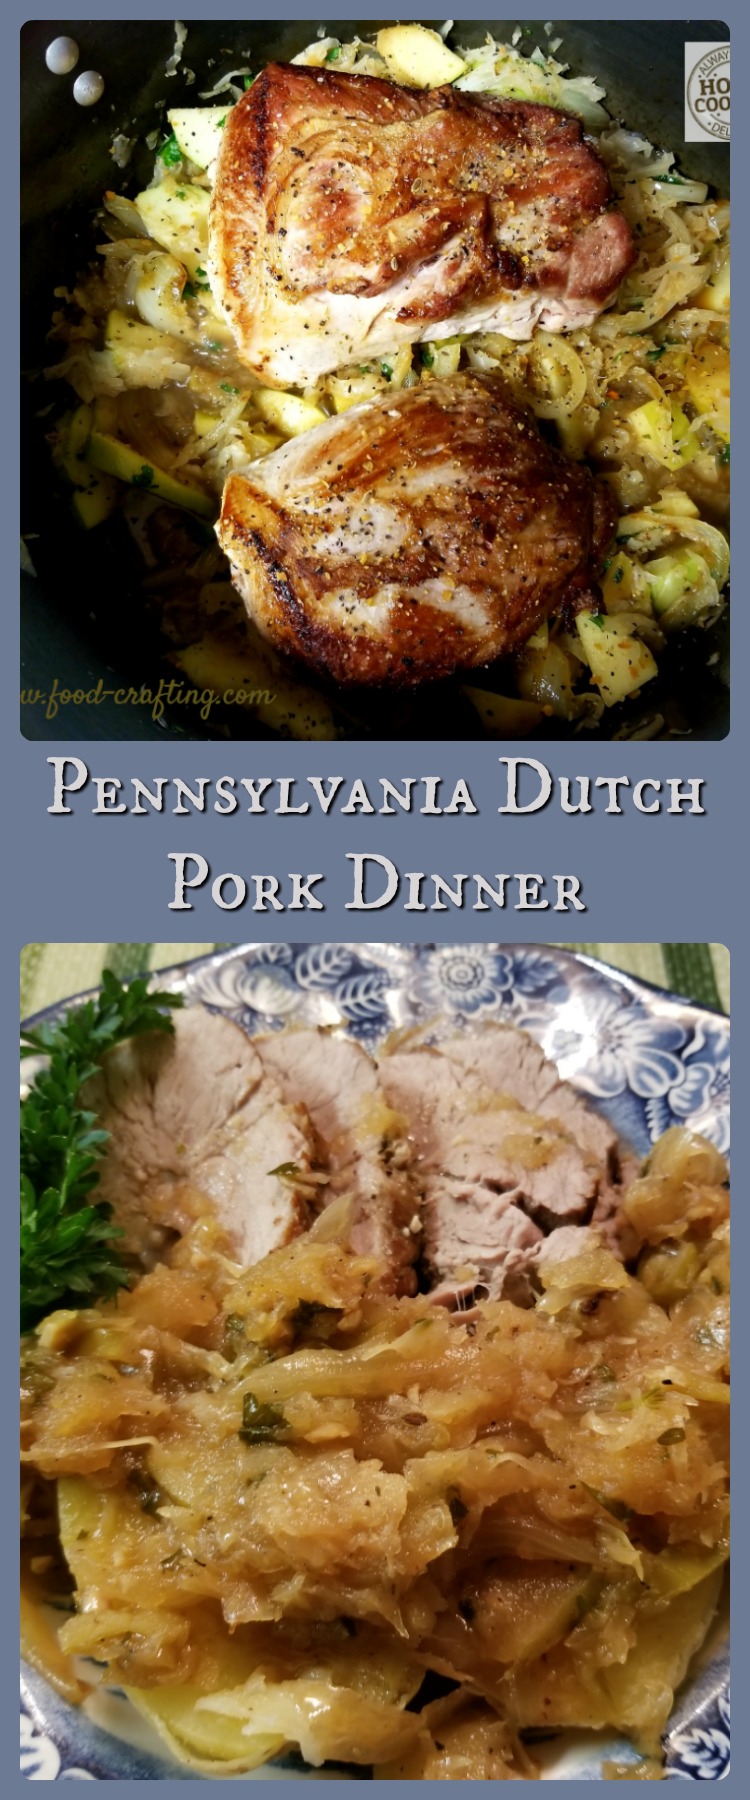 Pennsylvania Dutch Pork Ribs - a recipe for braised country style pork ribs with sauerkraut and apples . A close cousin to French Choucroute Garnie!